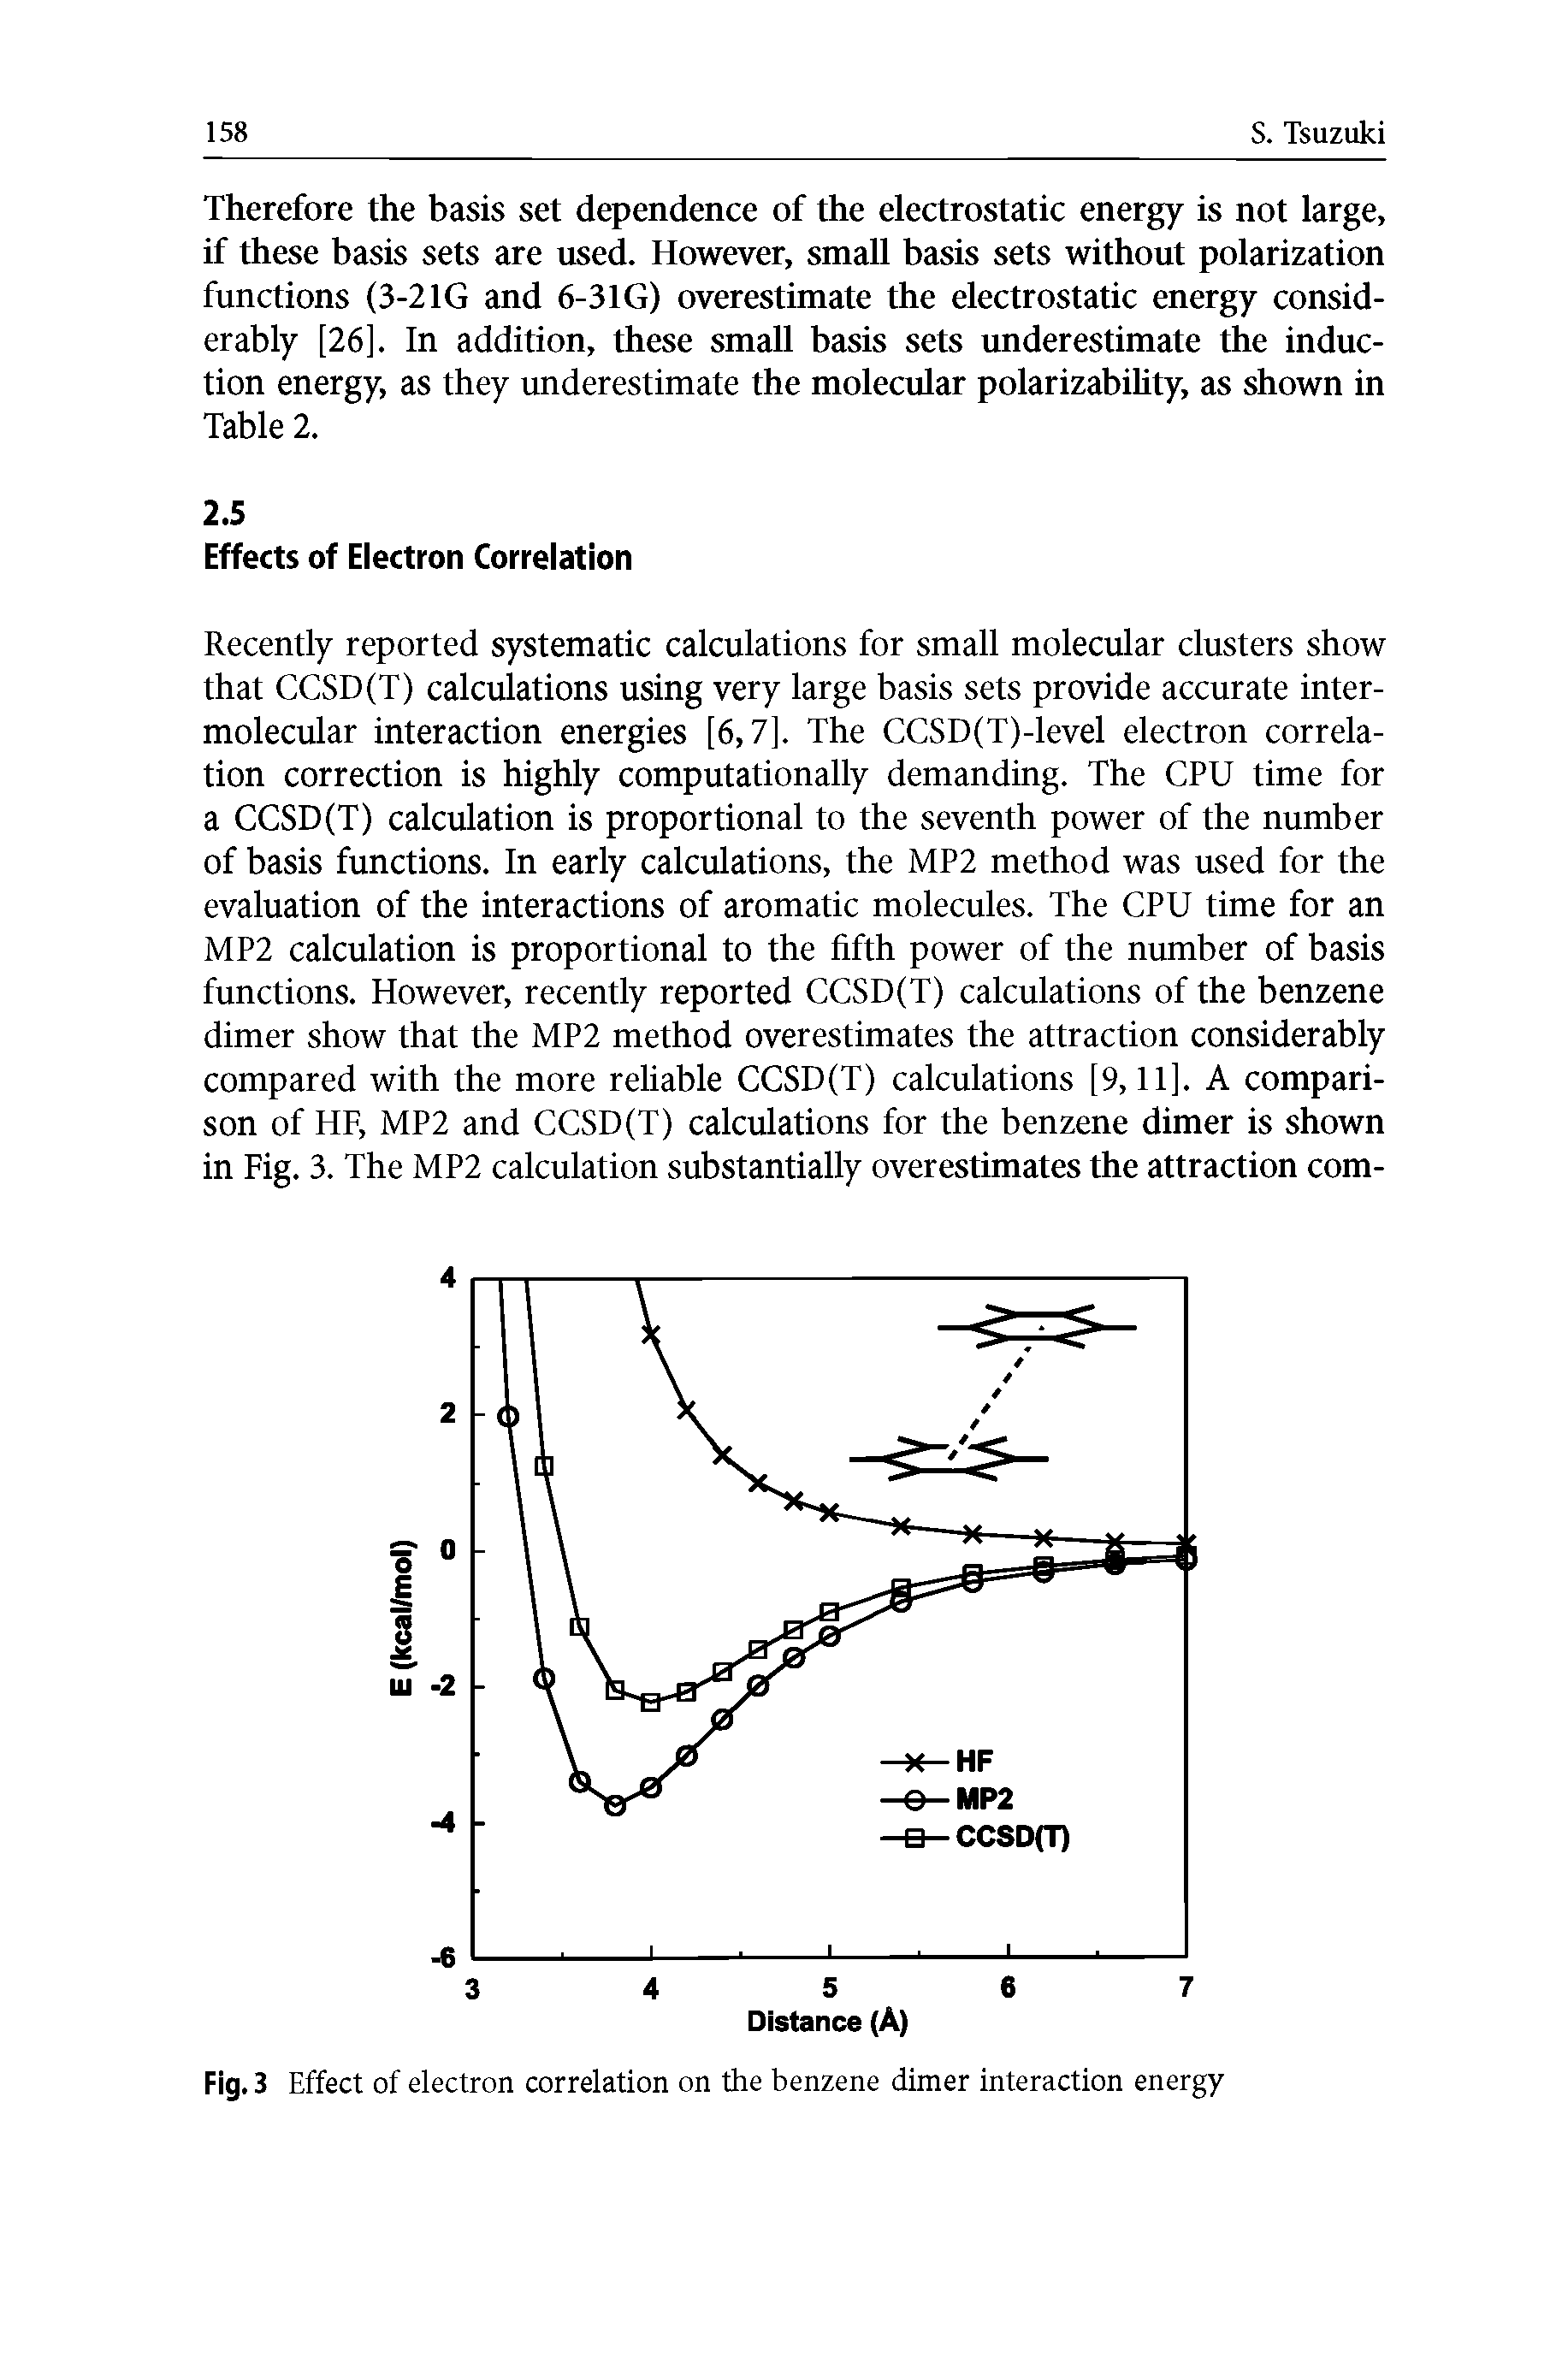 Fig. 3 Effect of electron correlation on the benzene dimer interaction energy...